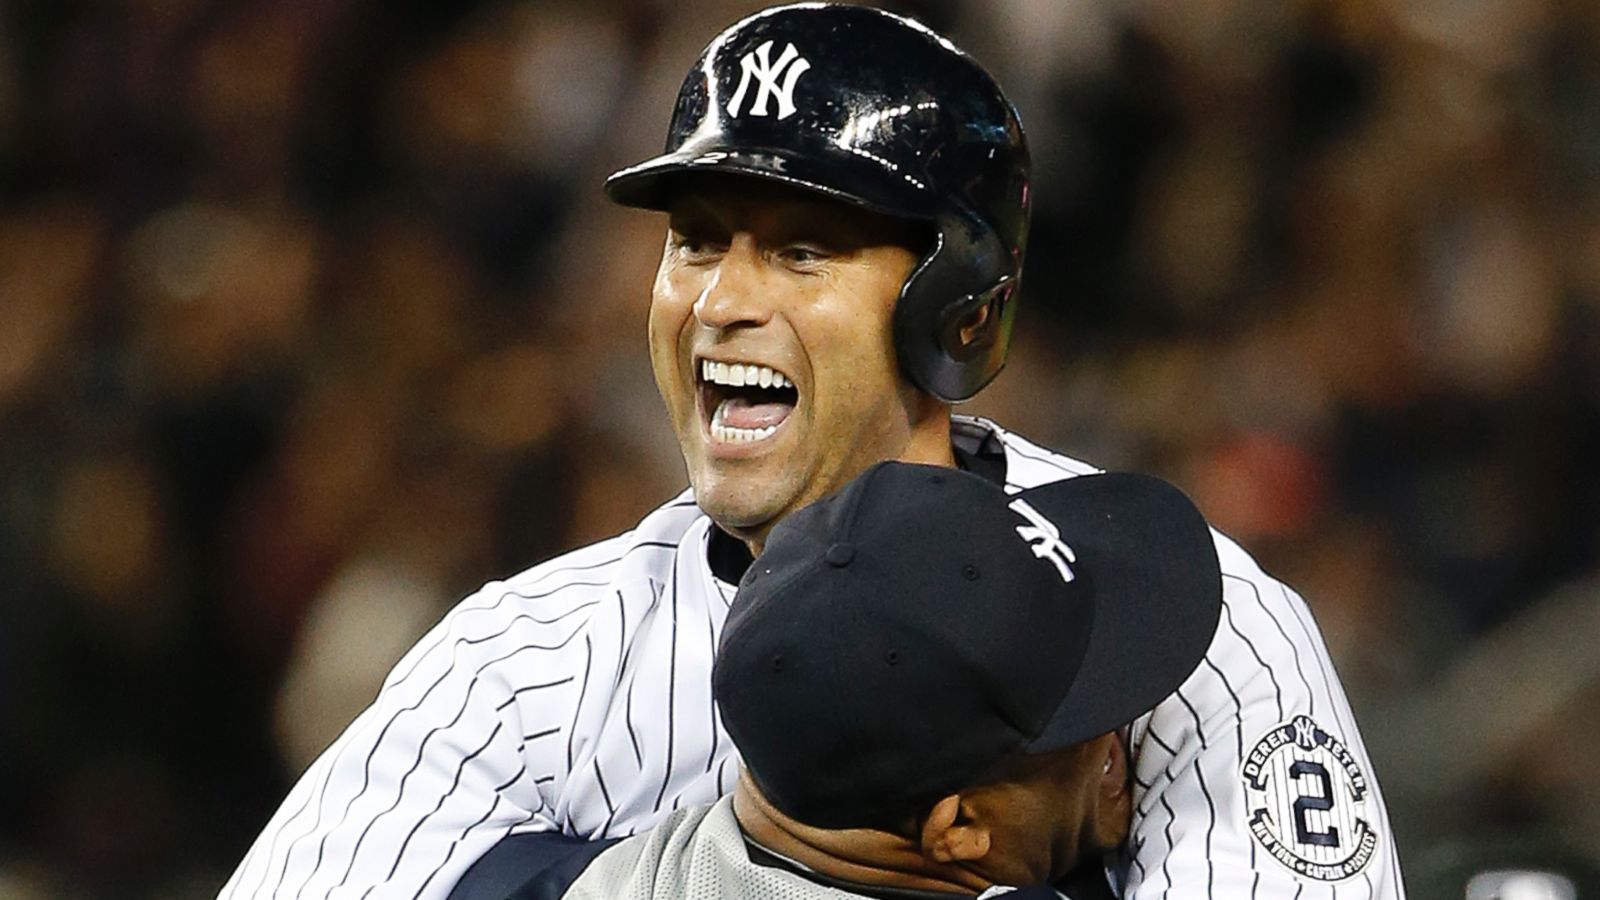 Jeter caps final game at Yankee Stadium with walk-off single – The